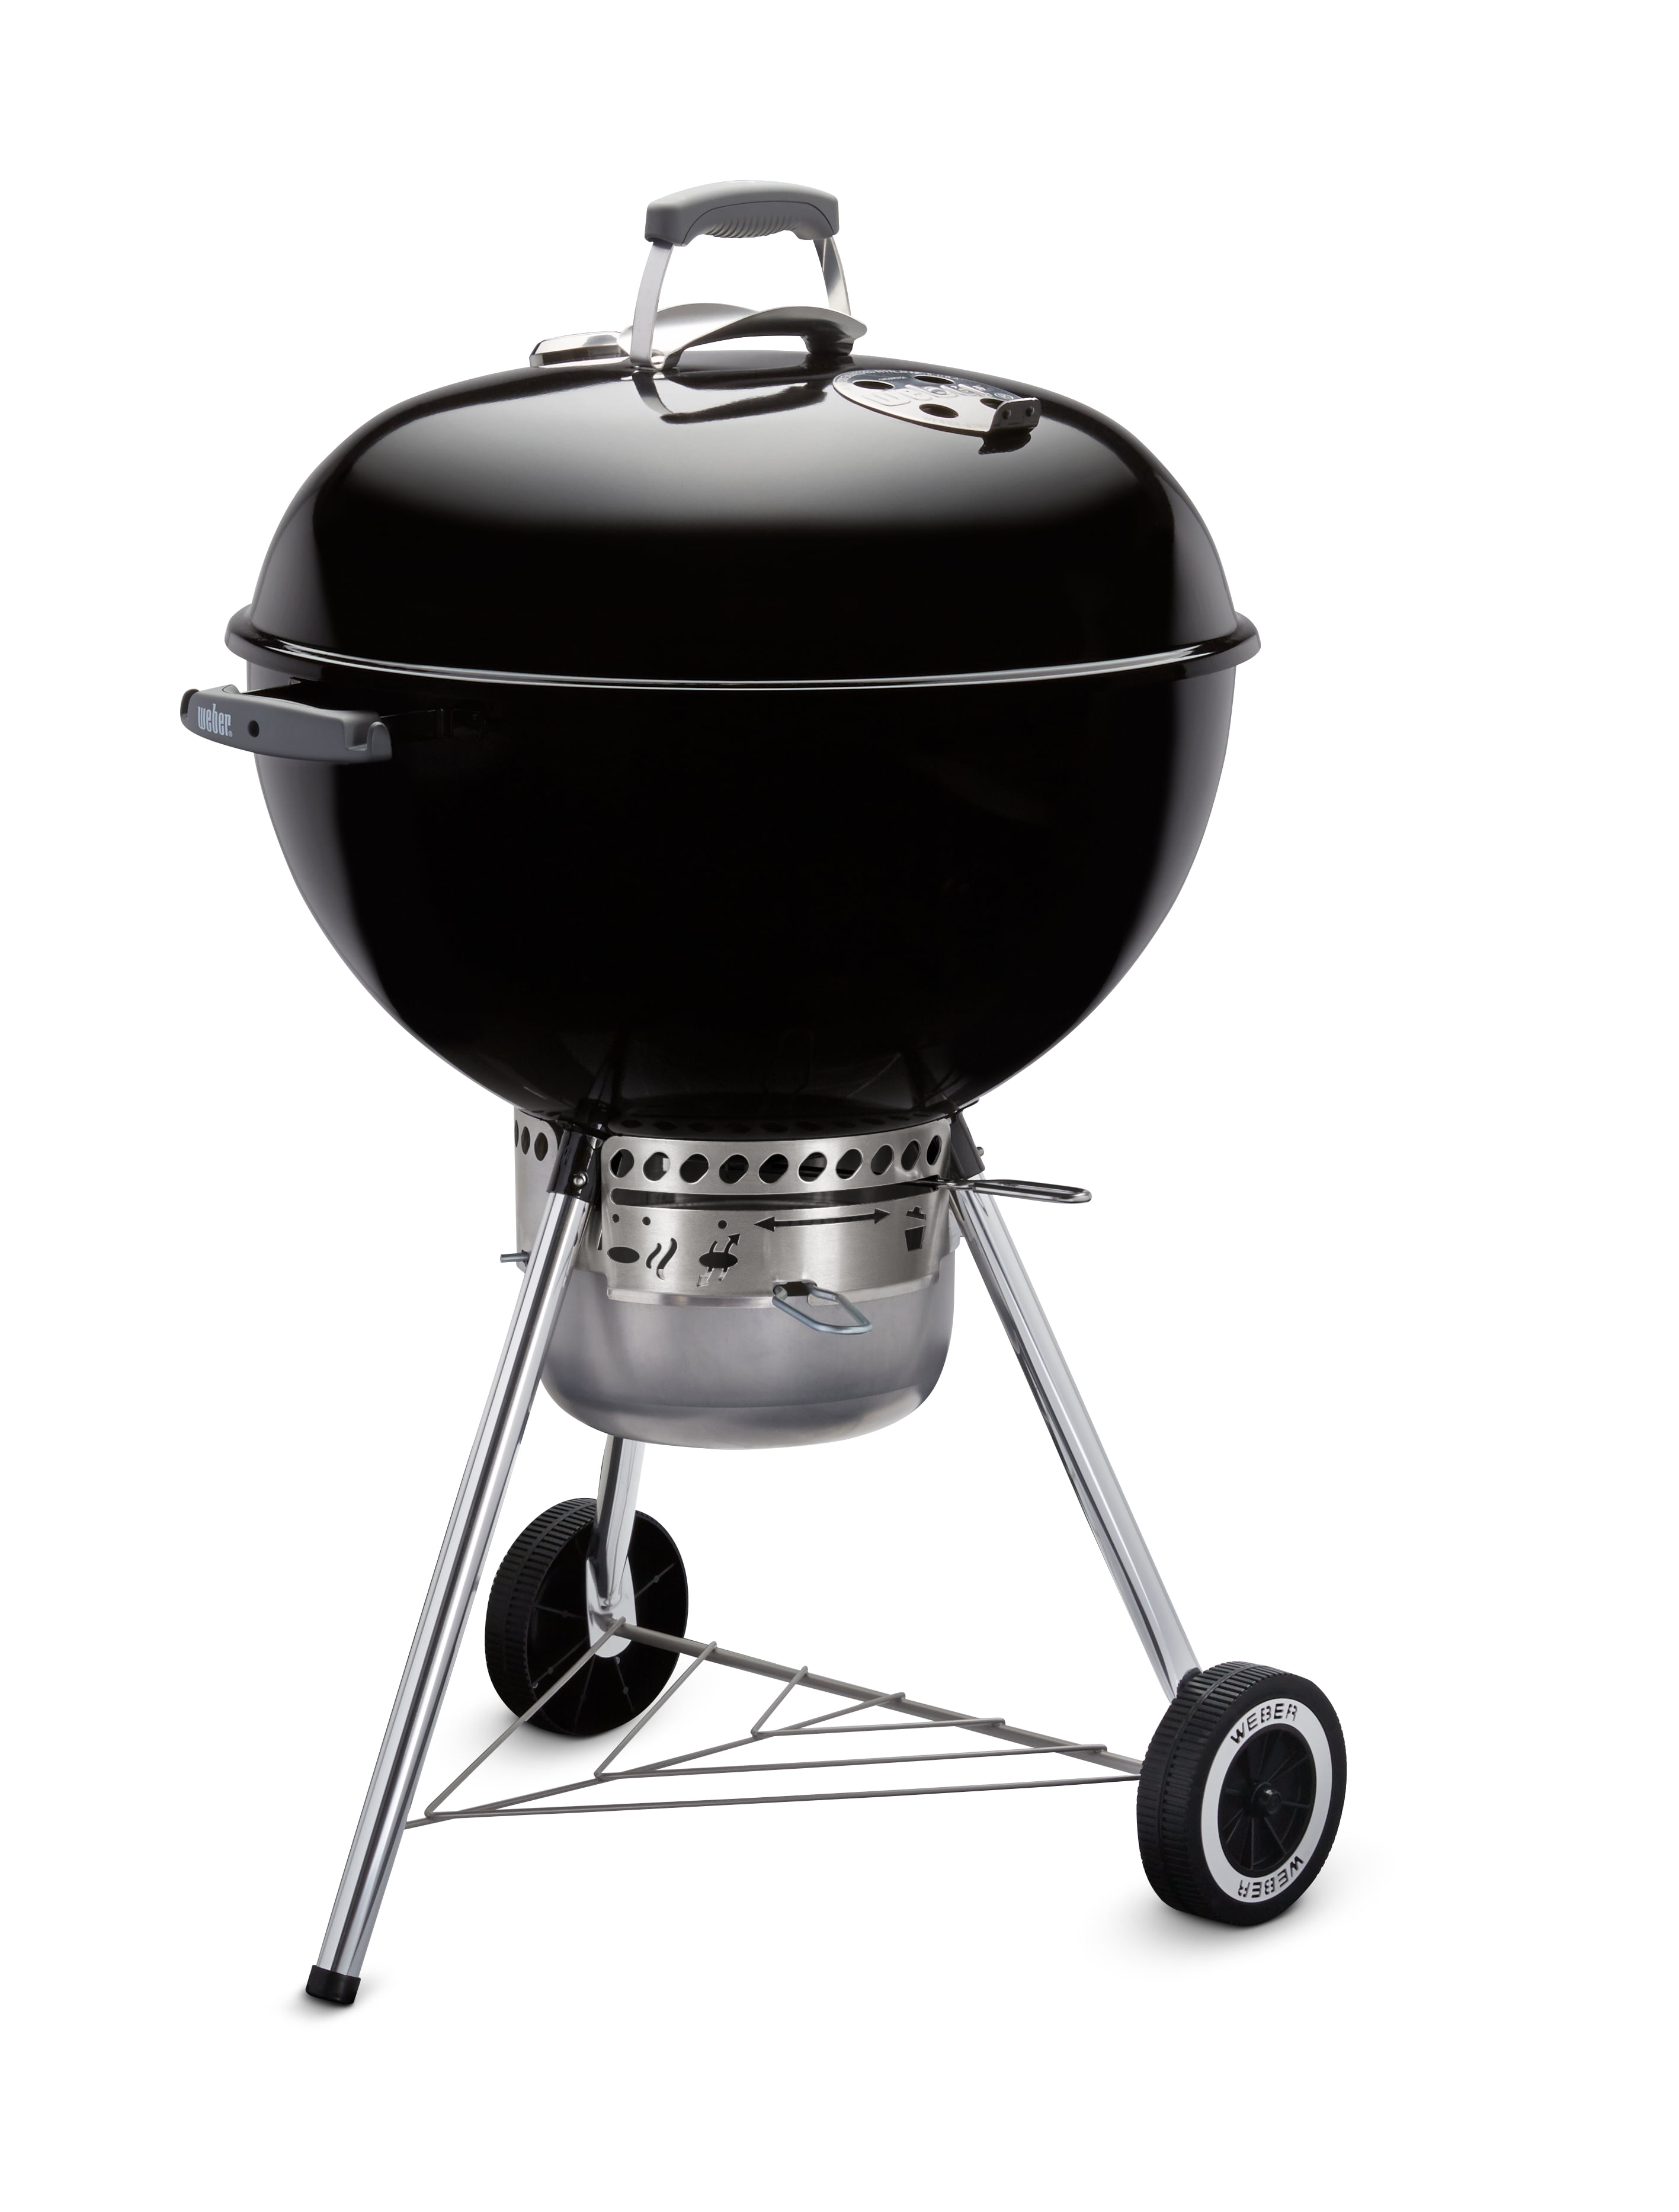 Weber Charcoal wood grill Jumbo Kettle 22 inches Black outdoors Premium NEW 